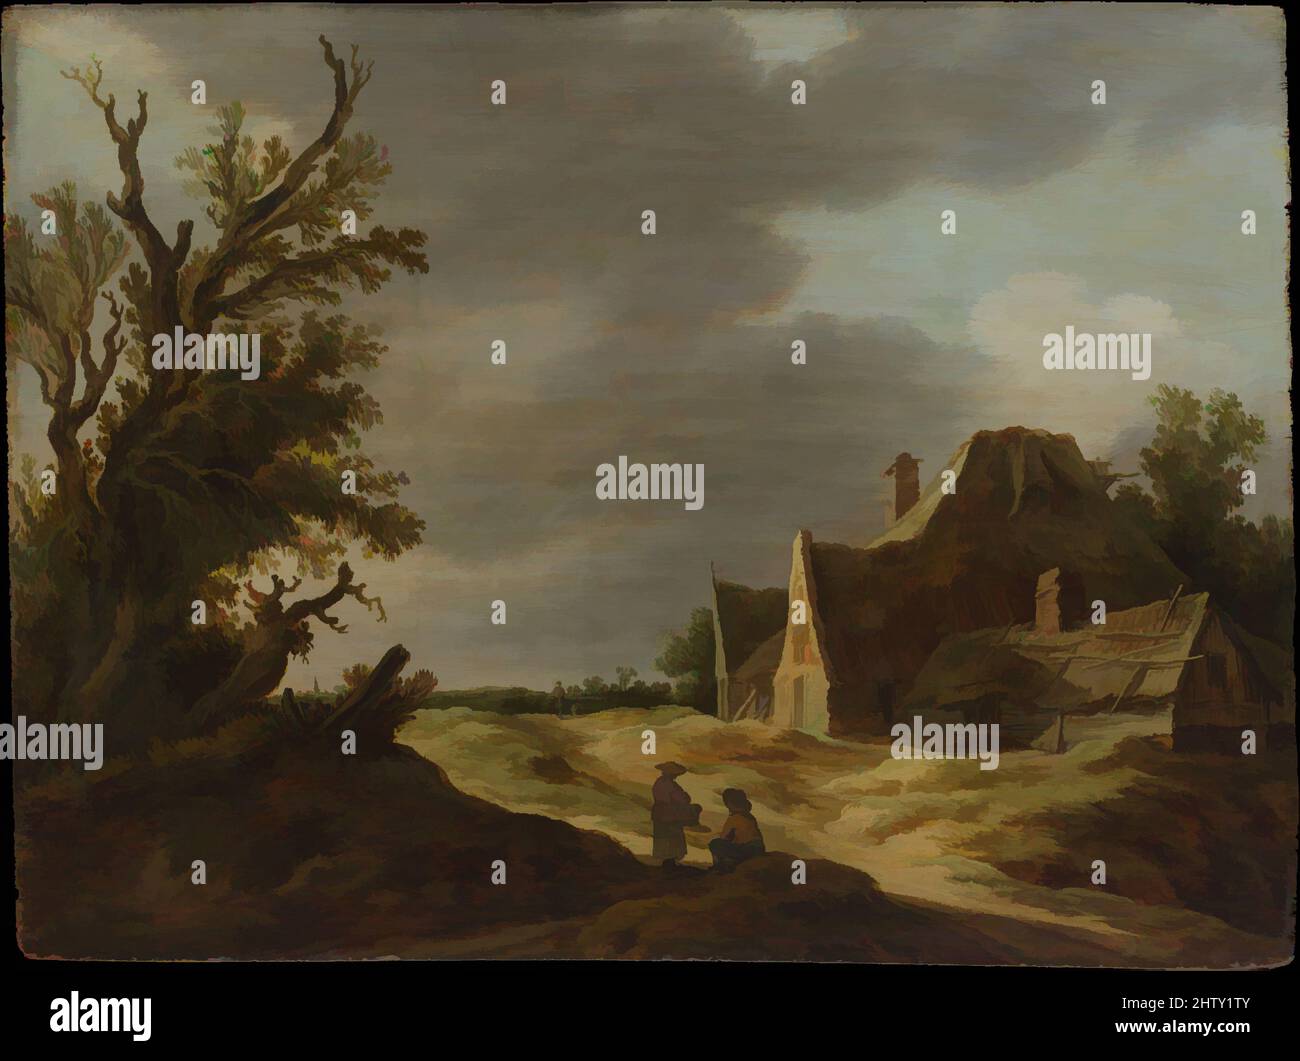 Art inspired by Sandy Road with a Farmhouse, 1627, Oil on wood, 12 1/8 x 16 1/4 in. (30.8 x 41.3 cm), Paintings, Jan van Goyen (Dutch, Leiden 1596–1656 The Hague), Painted in Leiden in 1627, this small panel is one of the earliest examples of a diagonal design that the artist would use, Classic works modernized by Artotop with a splash of modernity. Shapes, color and value, eye-catching visual impact on art. Emotions through freedom of artworks in a contemporary way. A timeless message pursuing a wildly creative new direction. Artists turning to the digital medium and creating the Artotop NFT Stock Photo